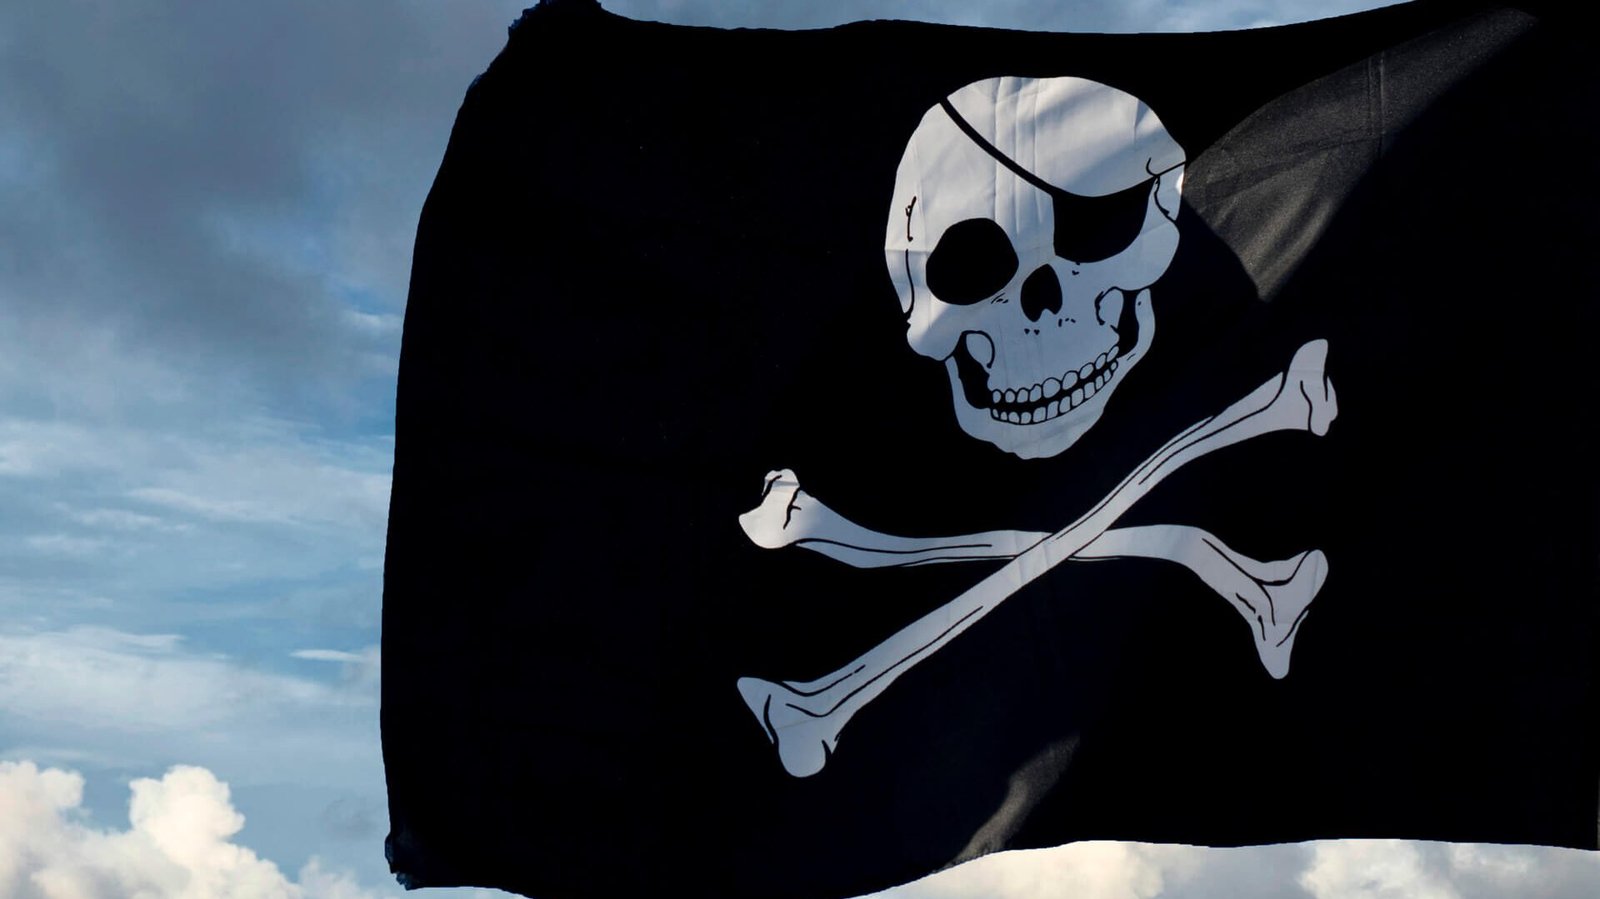 A black and white pirate flag with a skull and crossbones.